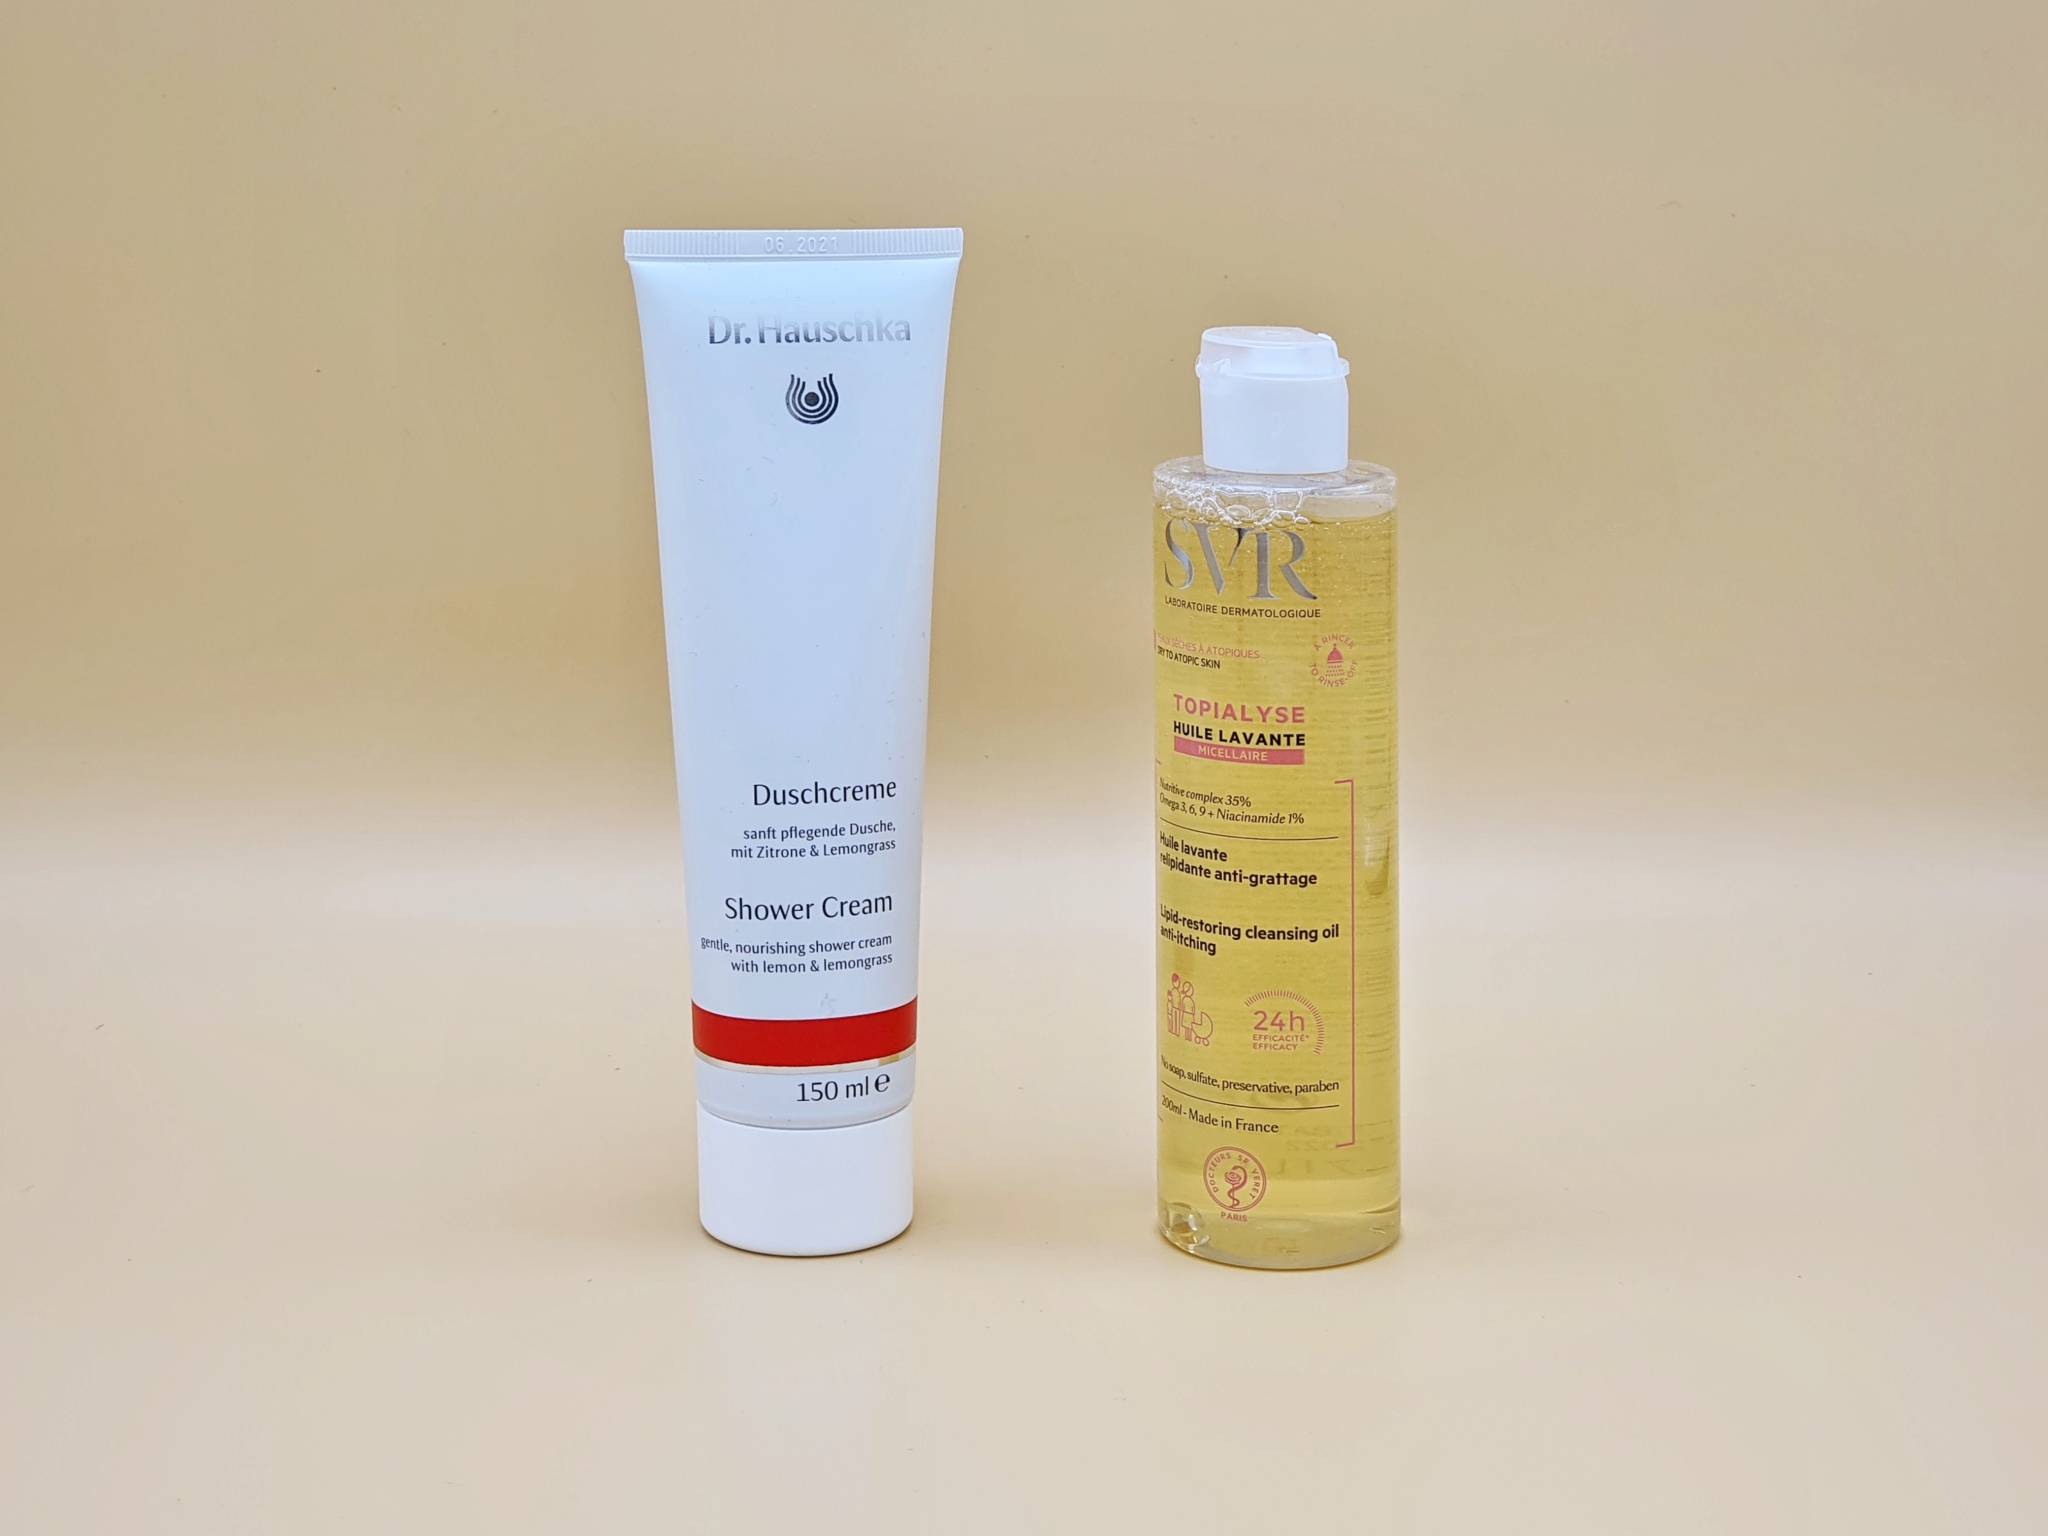 Dr Hauschka and SVR body washes